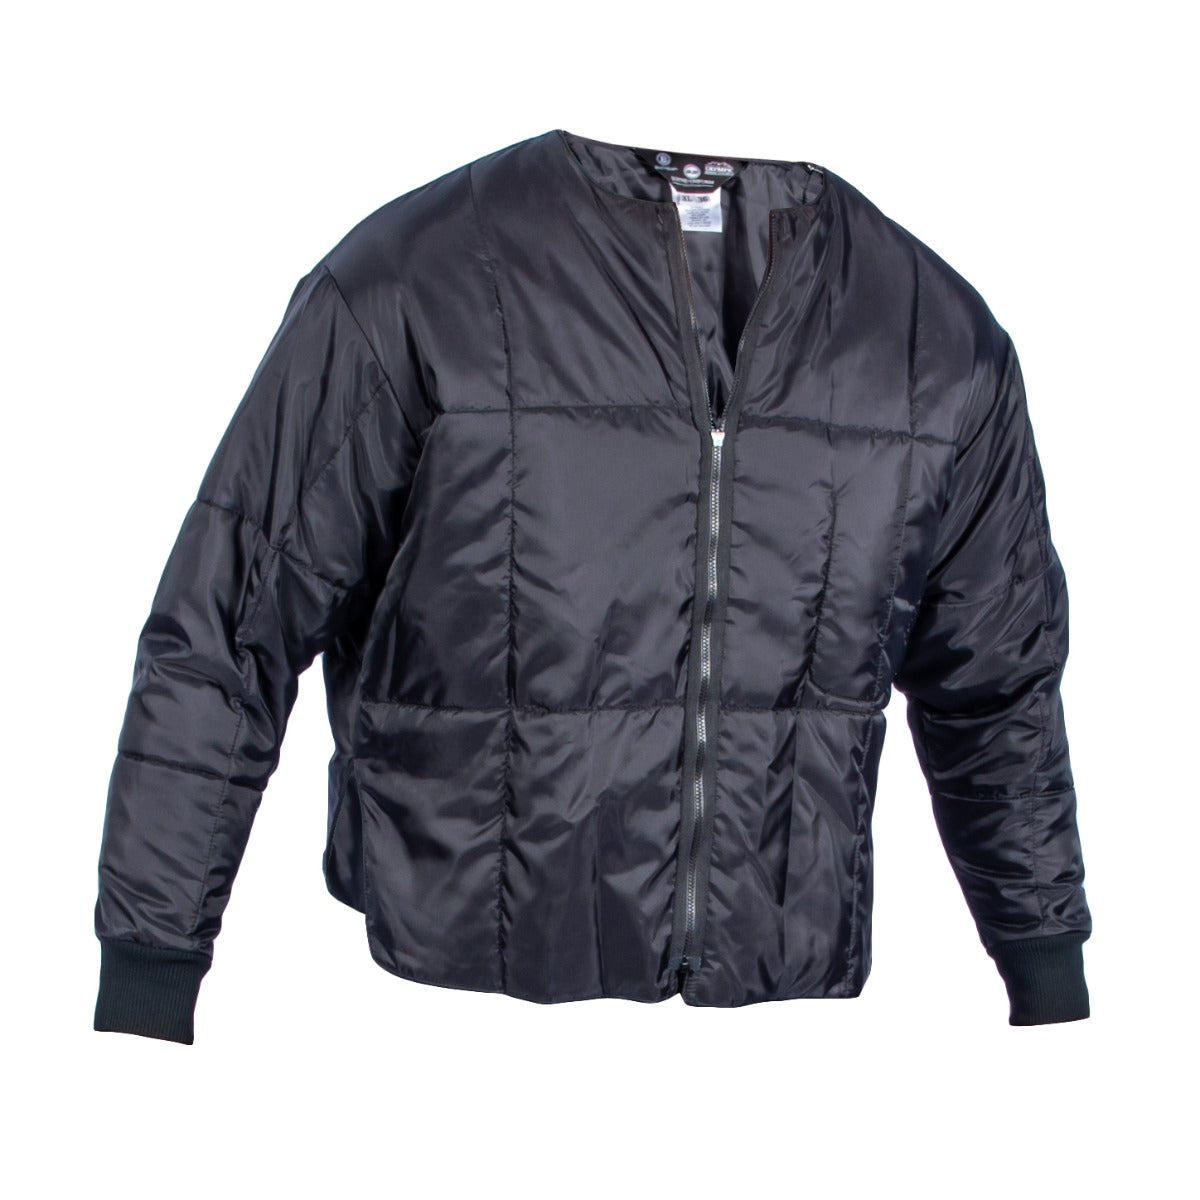 Thinsulate Zip Out Jacket Liner - Sound Uniform Solutions